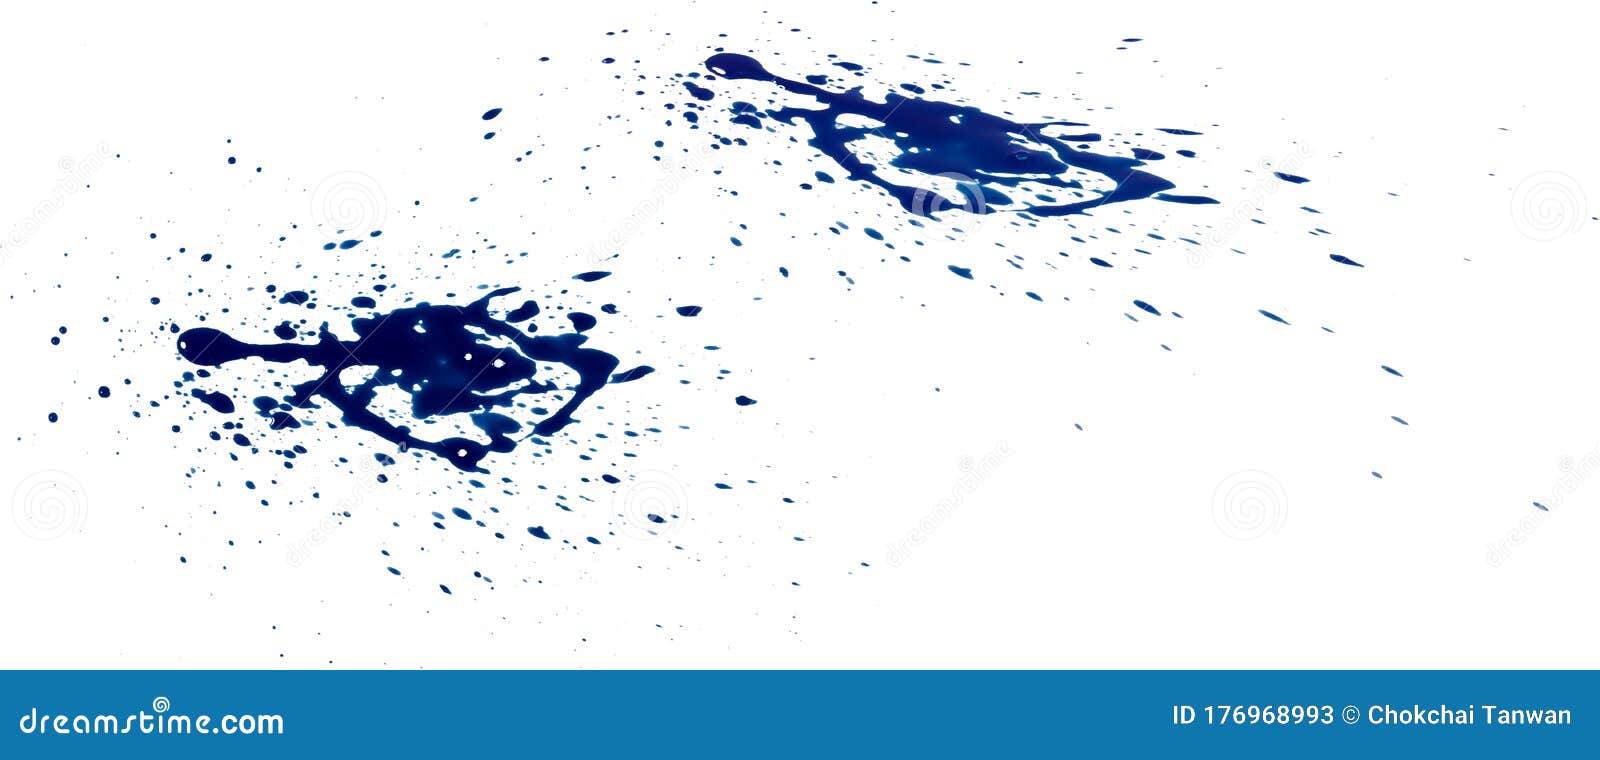 Abstract Blue Ink of Stain or Splash Blue Watercolor Paint and Liquid ...